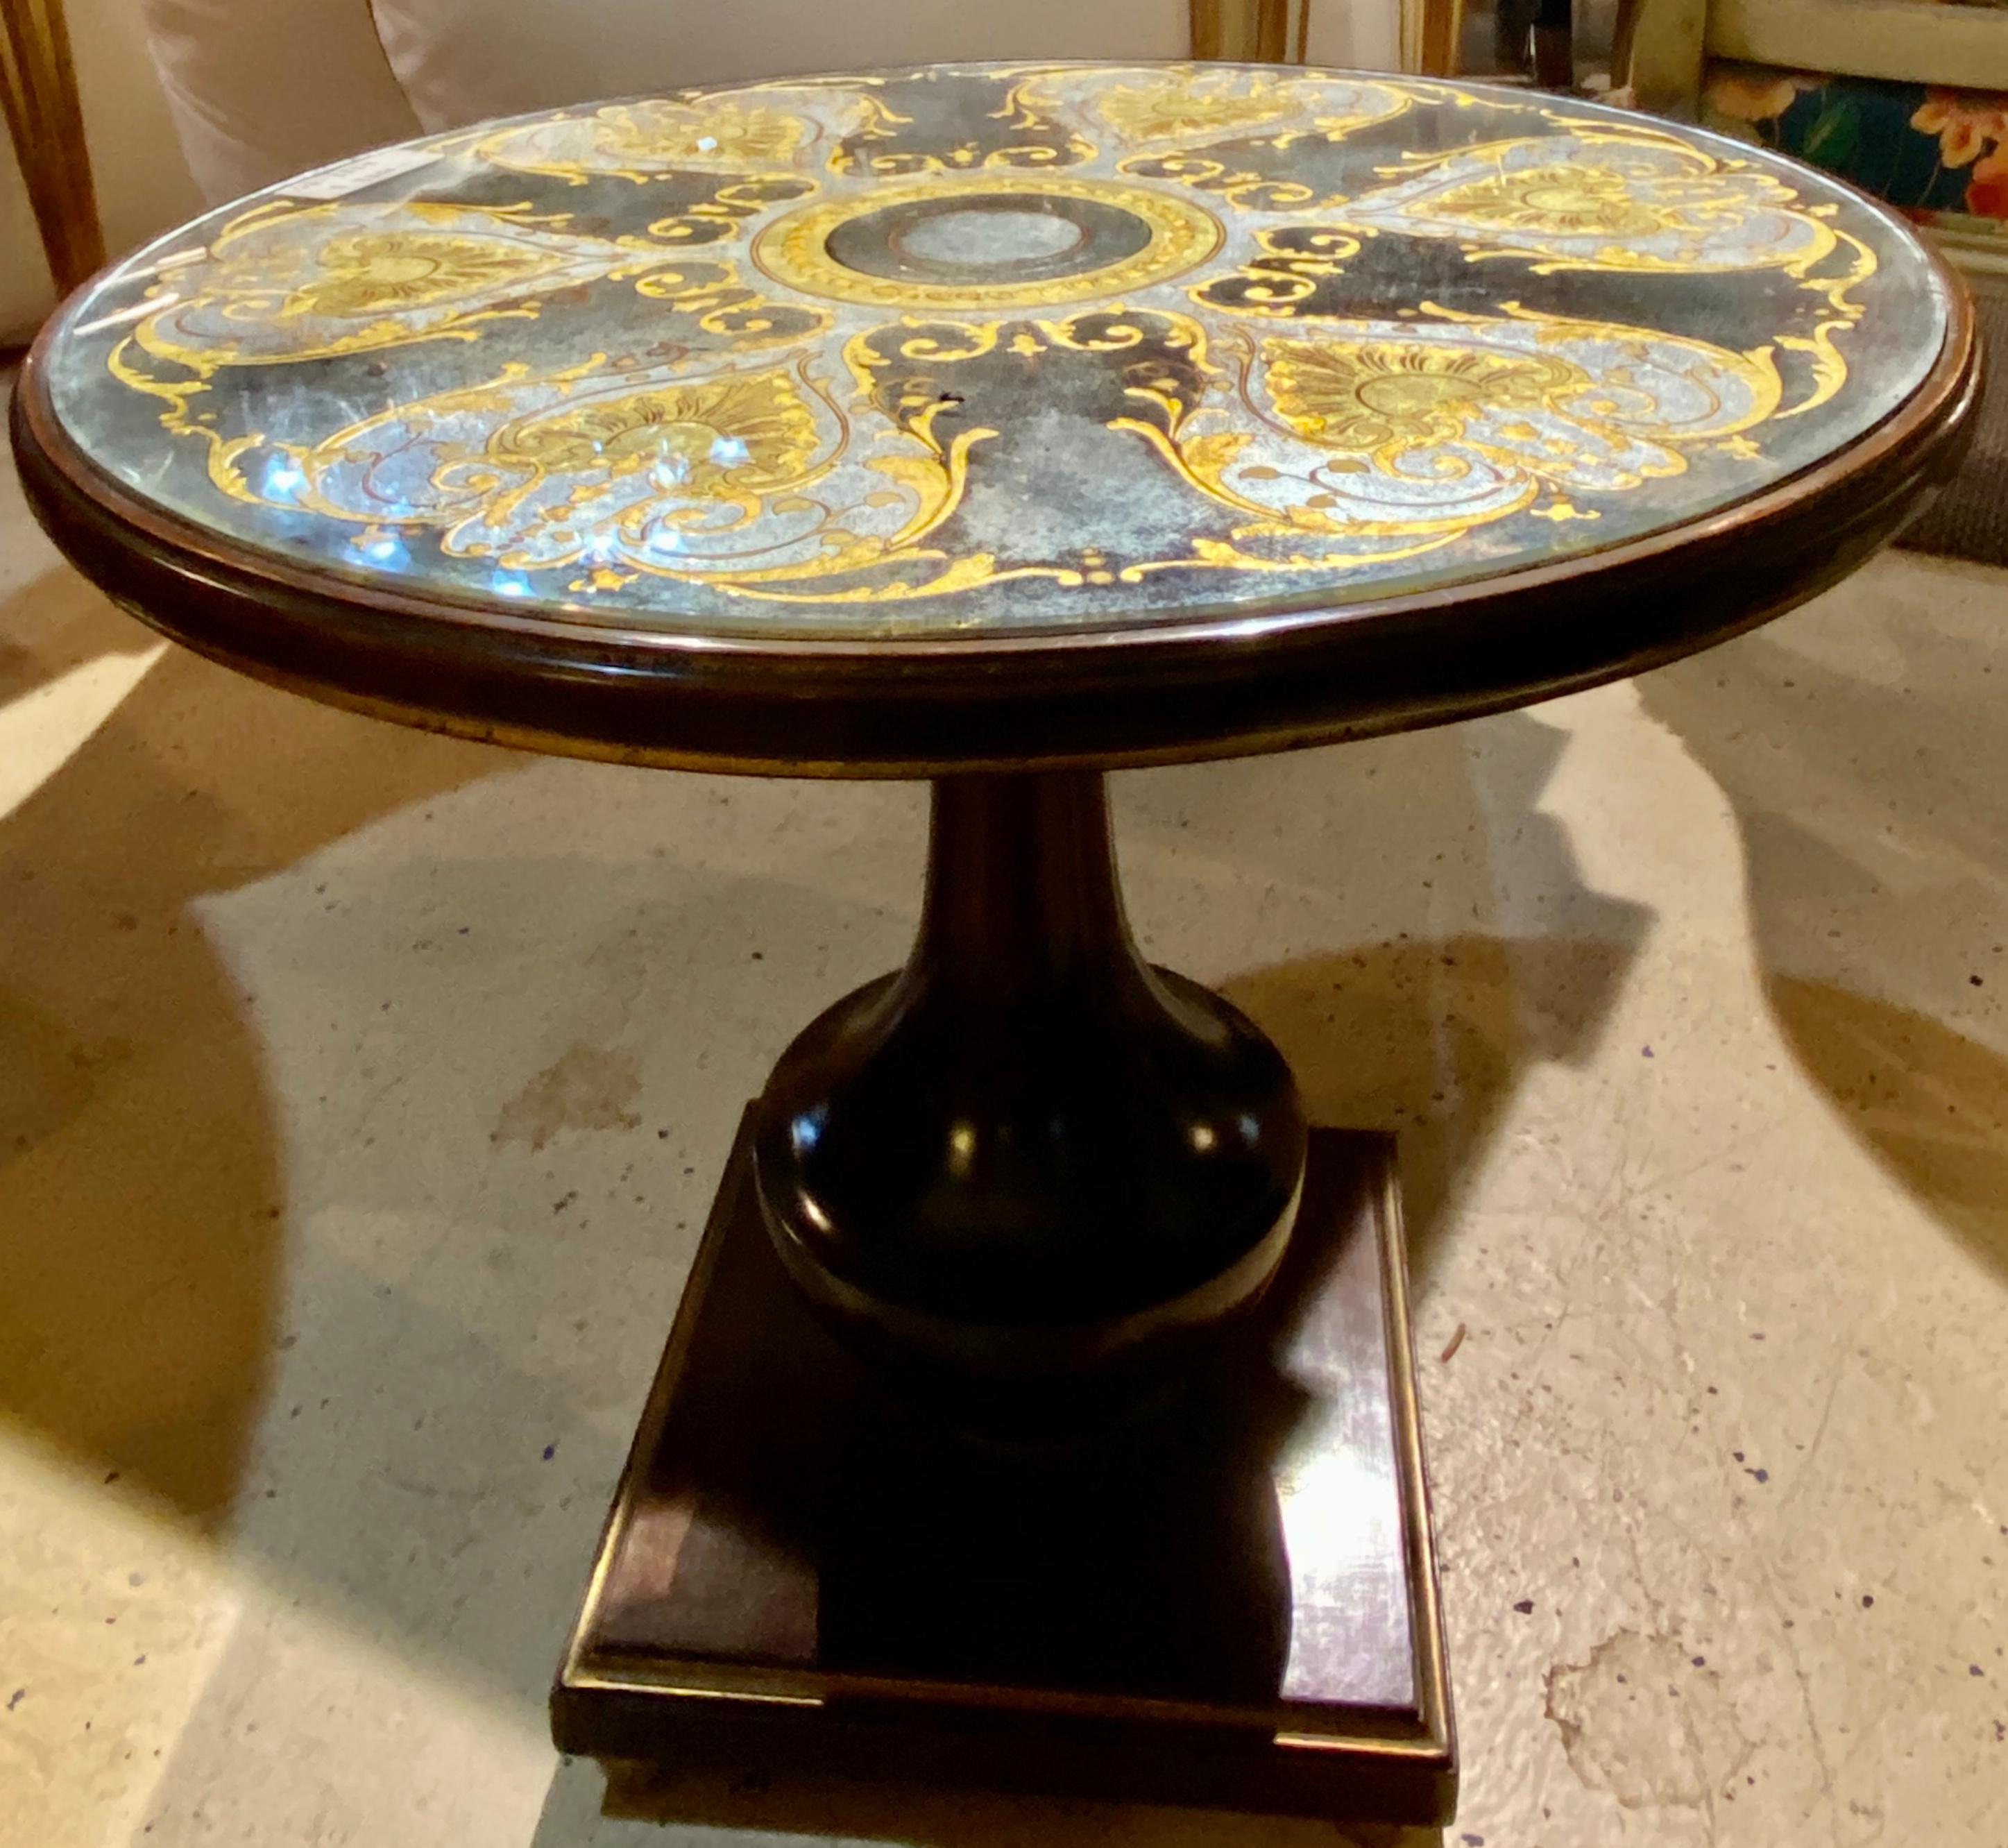 French Empire style mahogany and parcel-gilt gueridon occasional table, the circular top with verre Églomisé glass inset, atop a single pedestal supported by squared block base. By Maison Jansen.